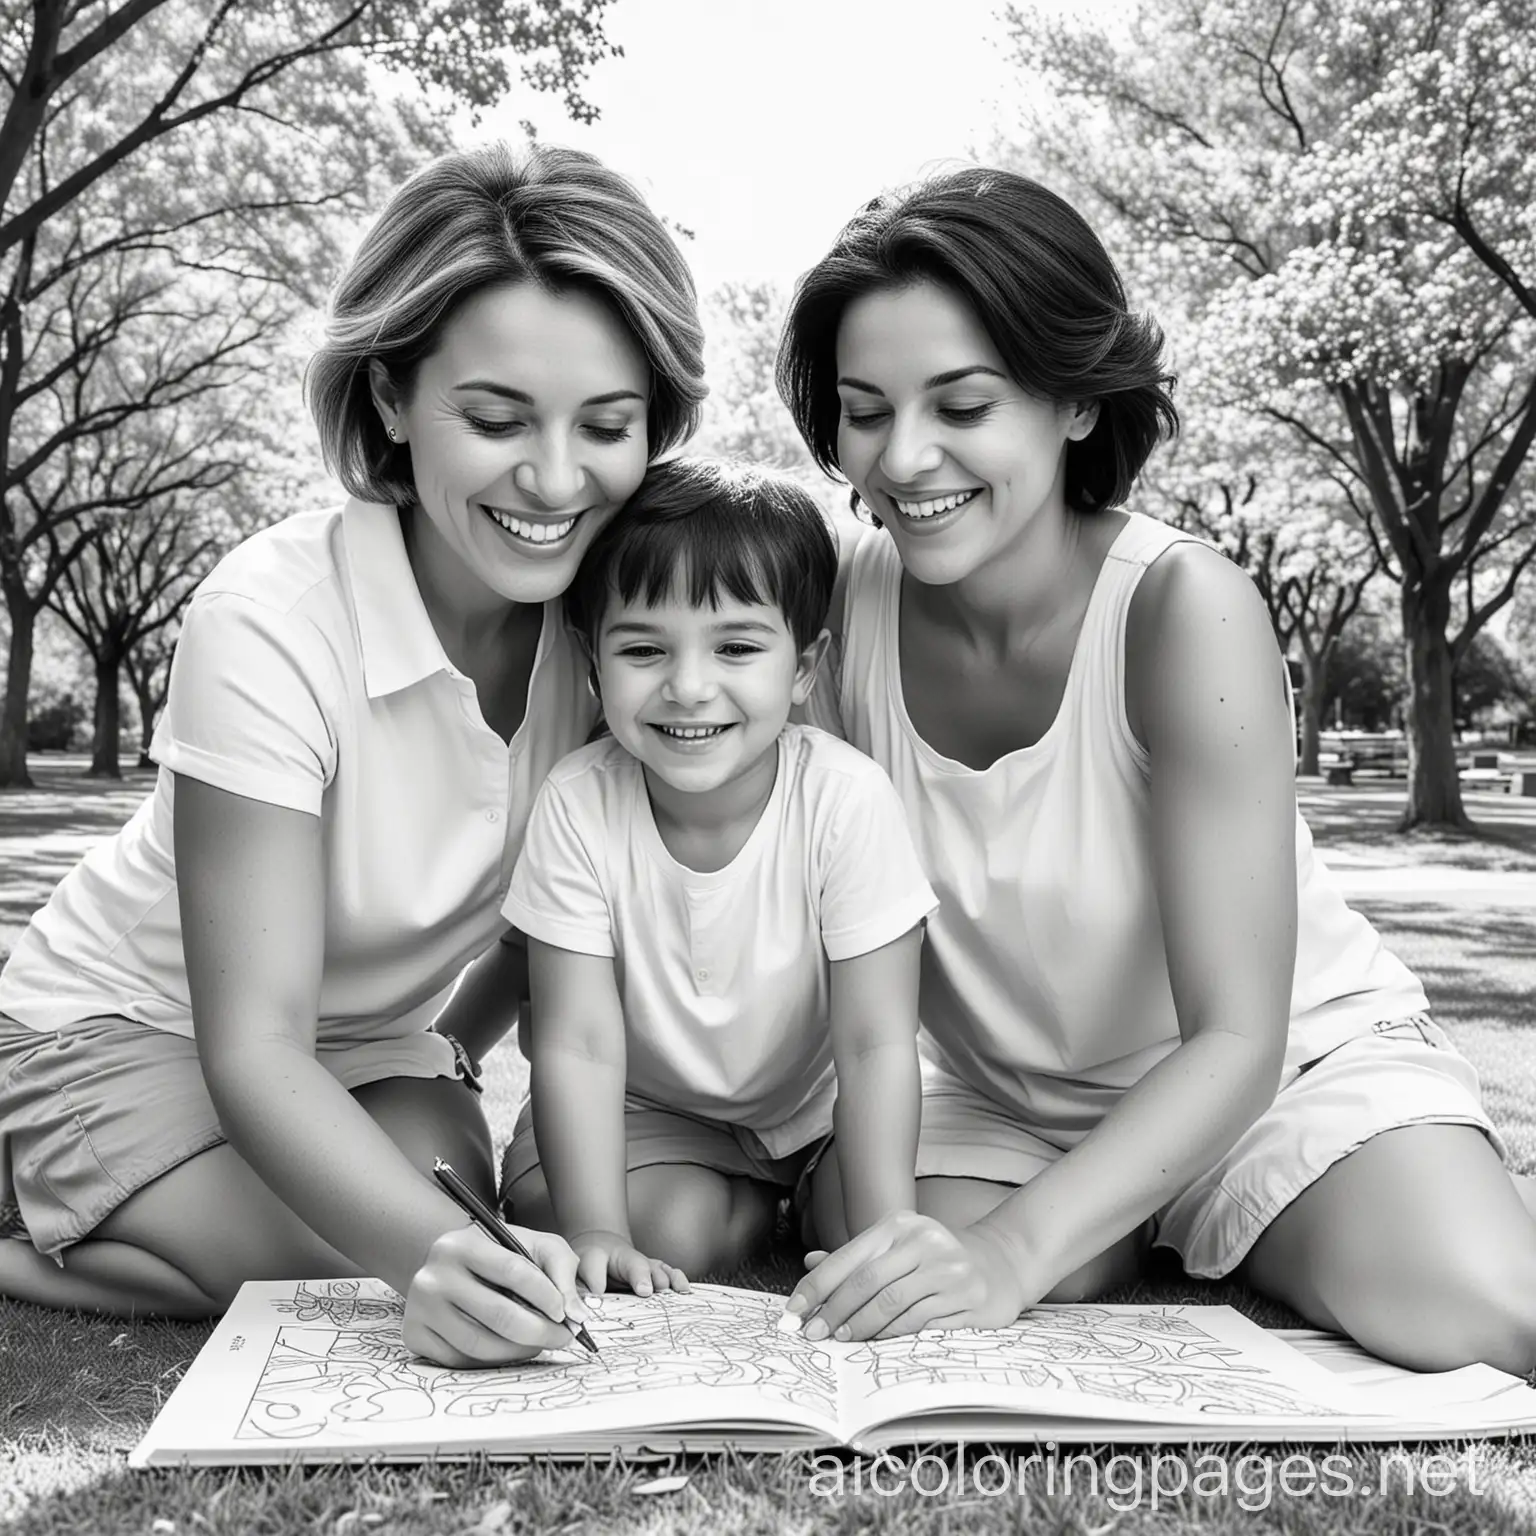 "Create a line art coloring book illustration of a middle-aged woman and a middle-aged Hispanic woman with short hair joyfully playing with a toddler boy and a 5-year-old girl in a sunny park setting.", Coloring Page, black and white, line art, white background, Simplicity, Ample White Space. The background of the coloring page is plain white to make it easy for young children to color within the lines. The outlines of all the subjects are easy to distinguish, making it simple for kids to color without too much difficulty